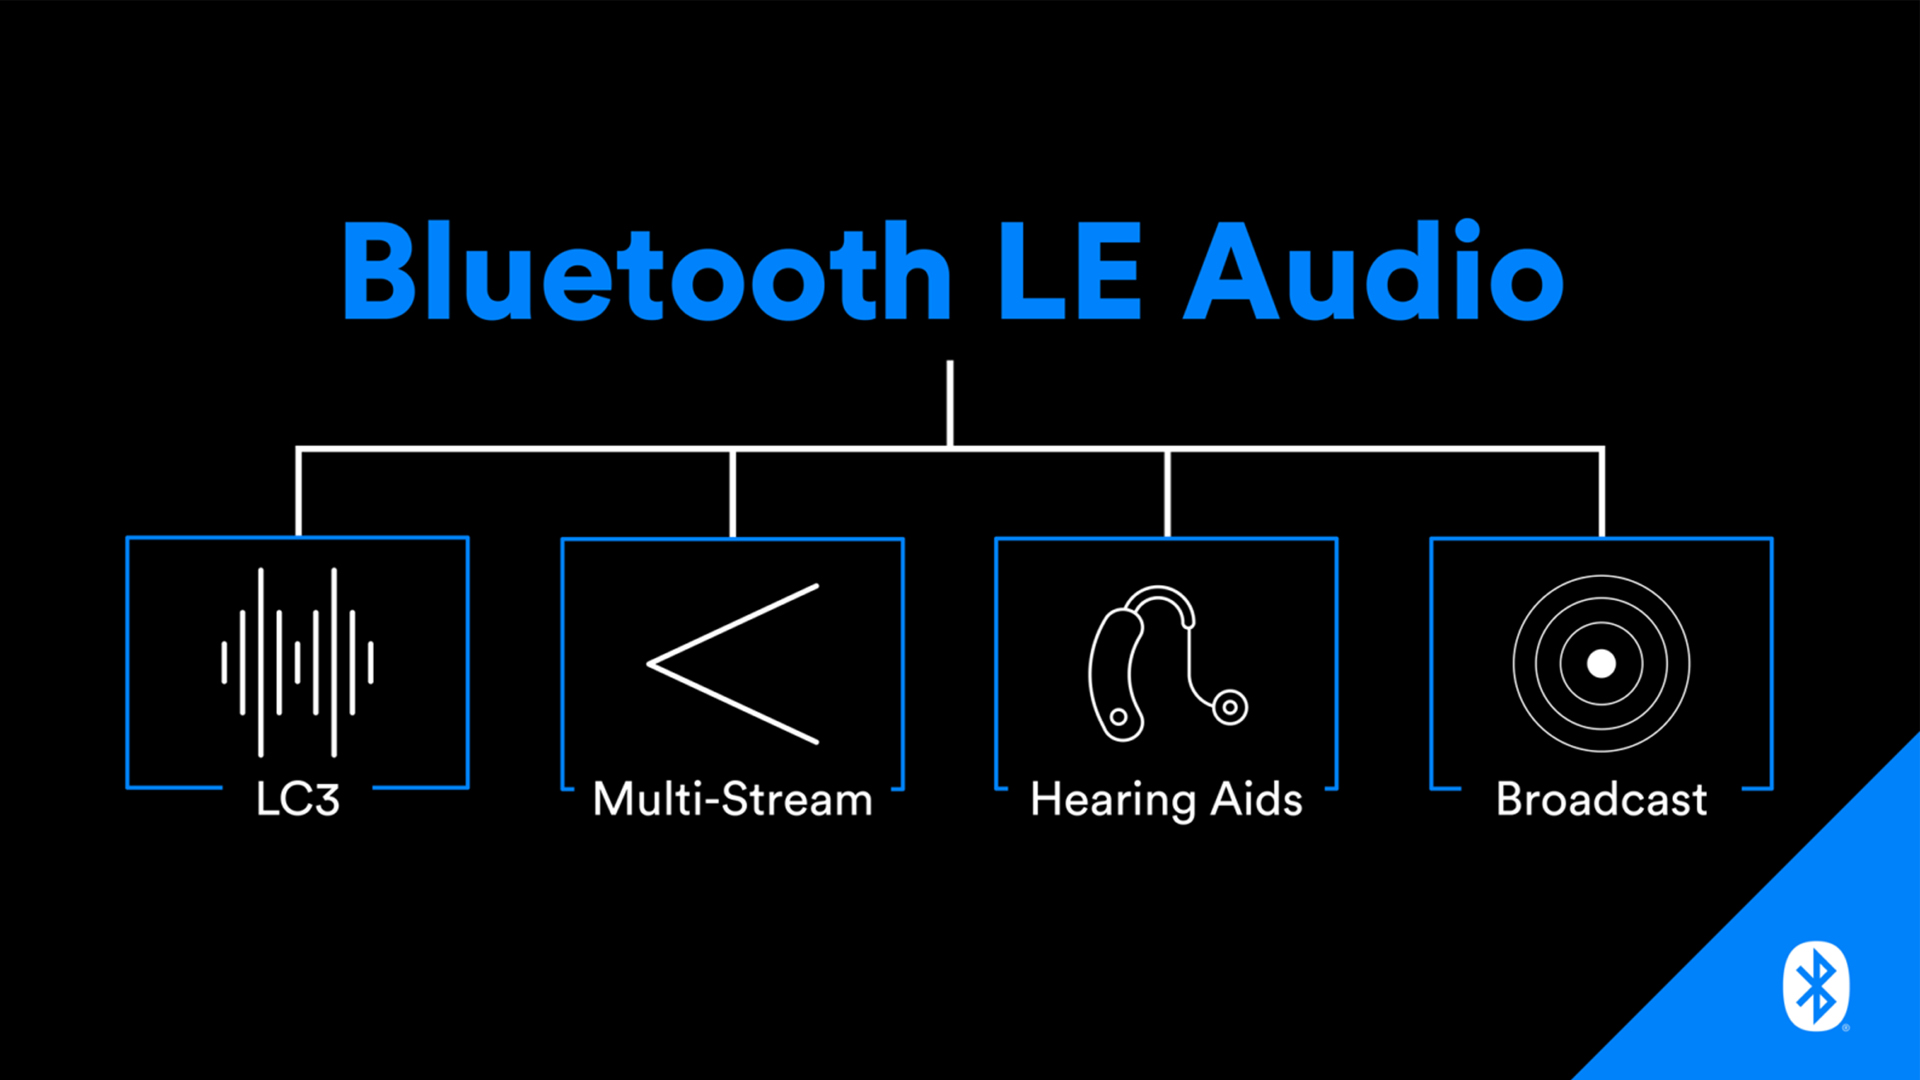 New Features of „LE Audio“ (Image: Bluetooth Special Interest Group)